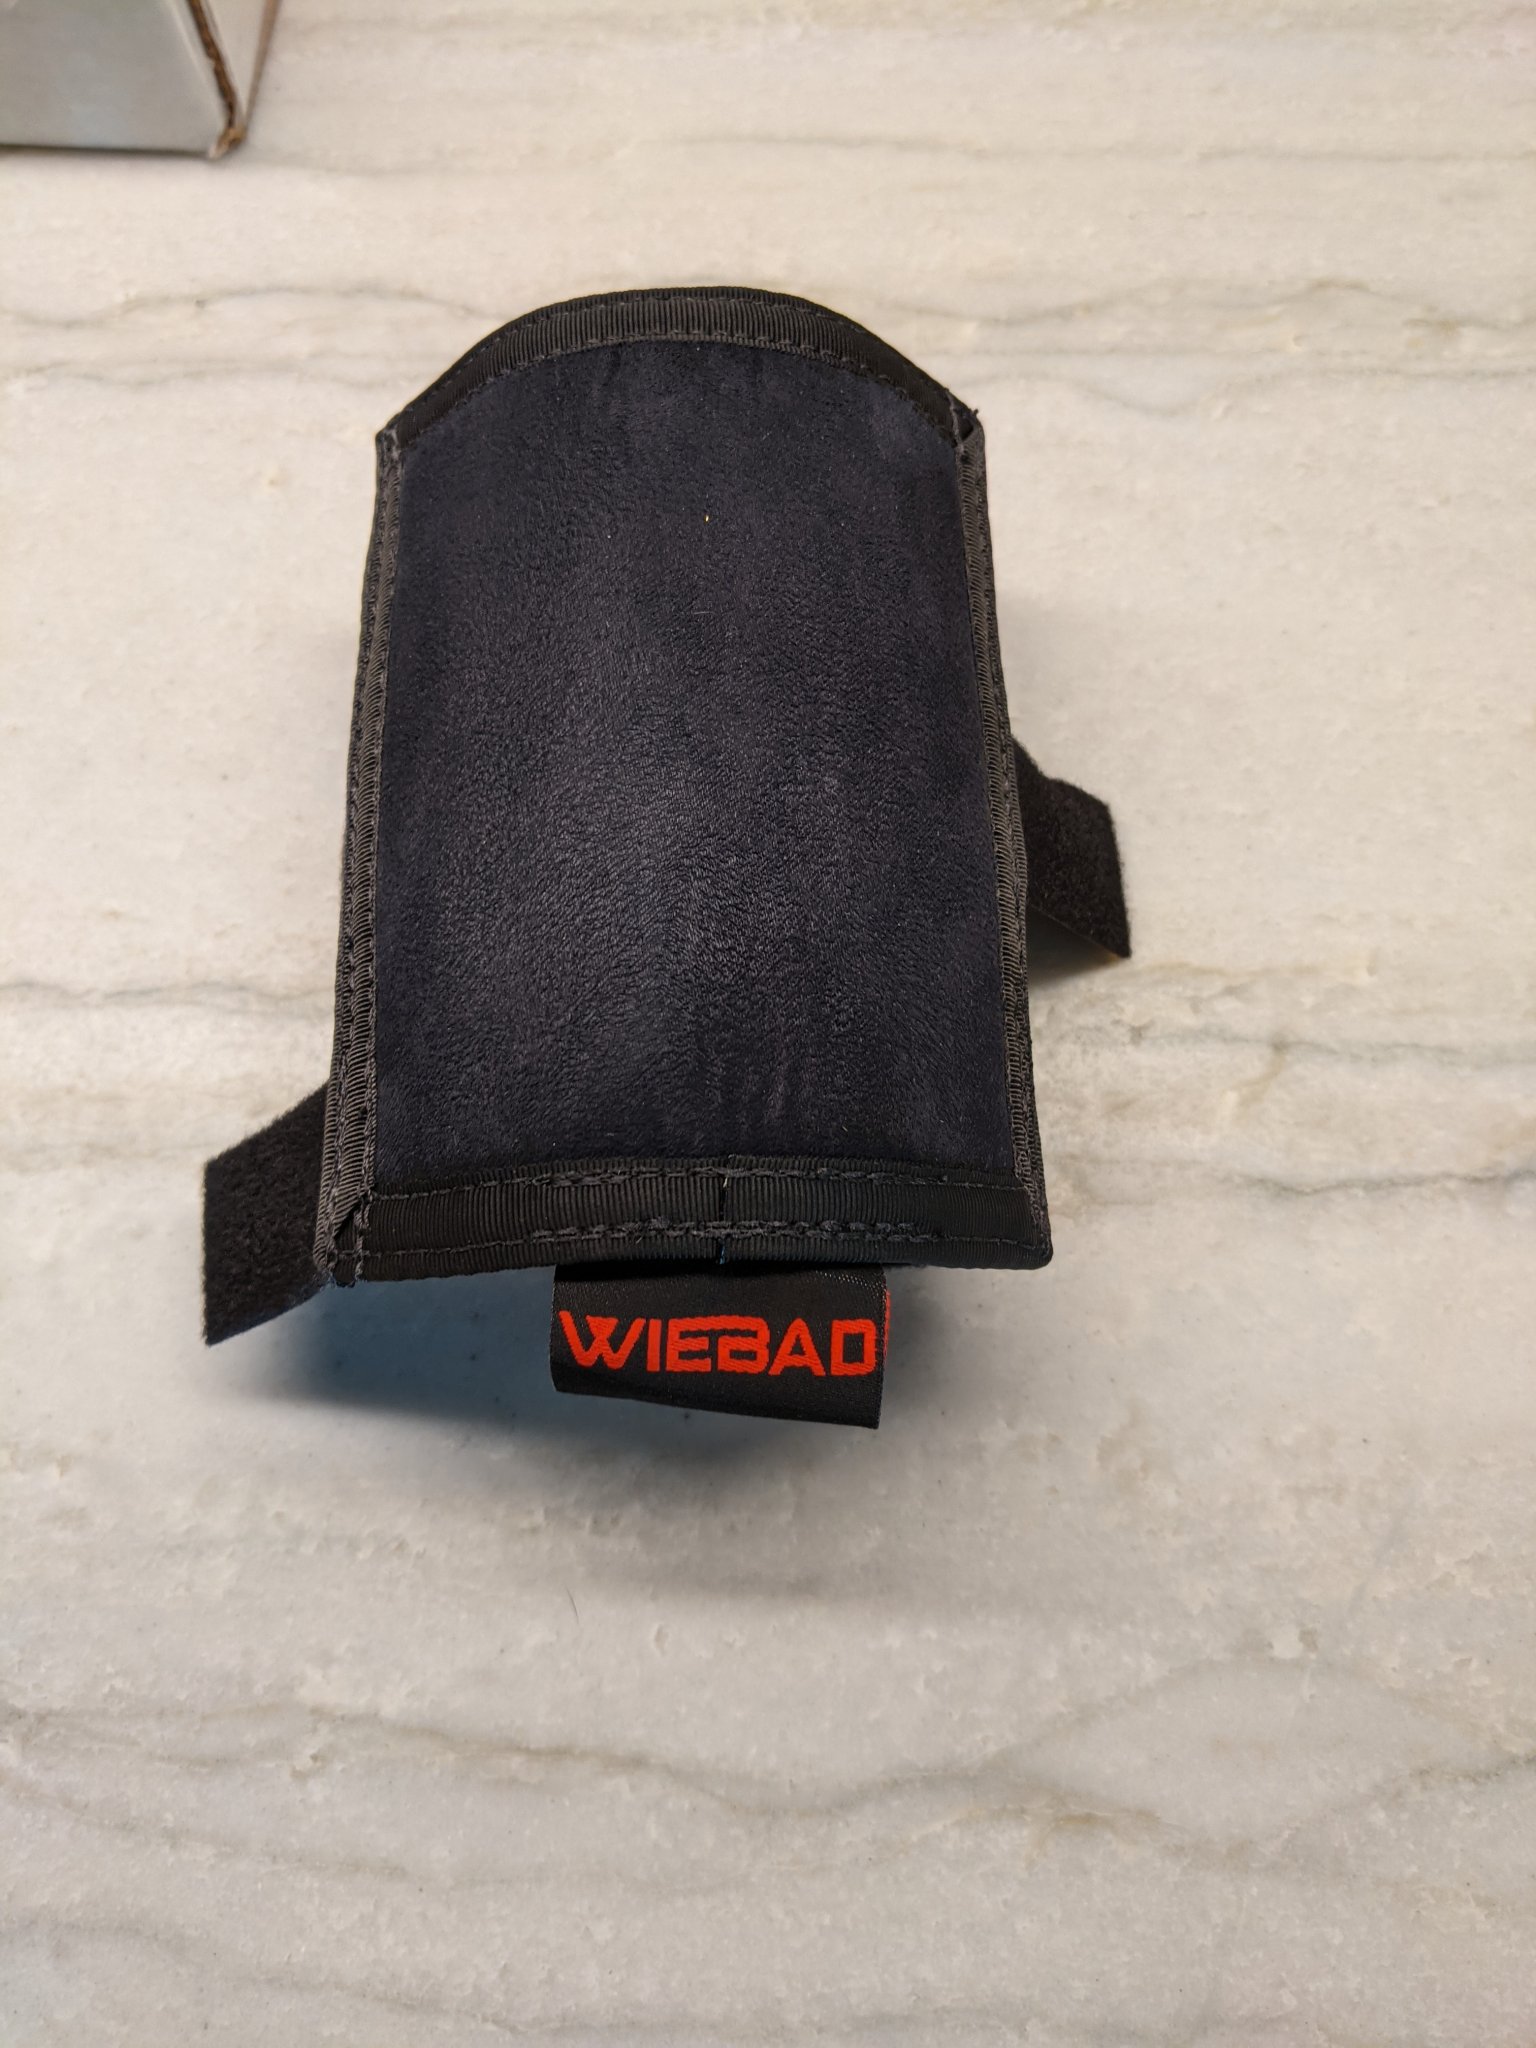 SOLD - Weibad manners cheek pad | Sniper's Hide Forum